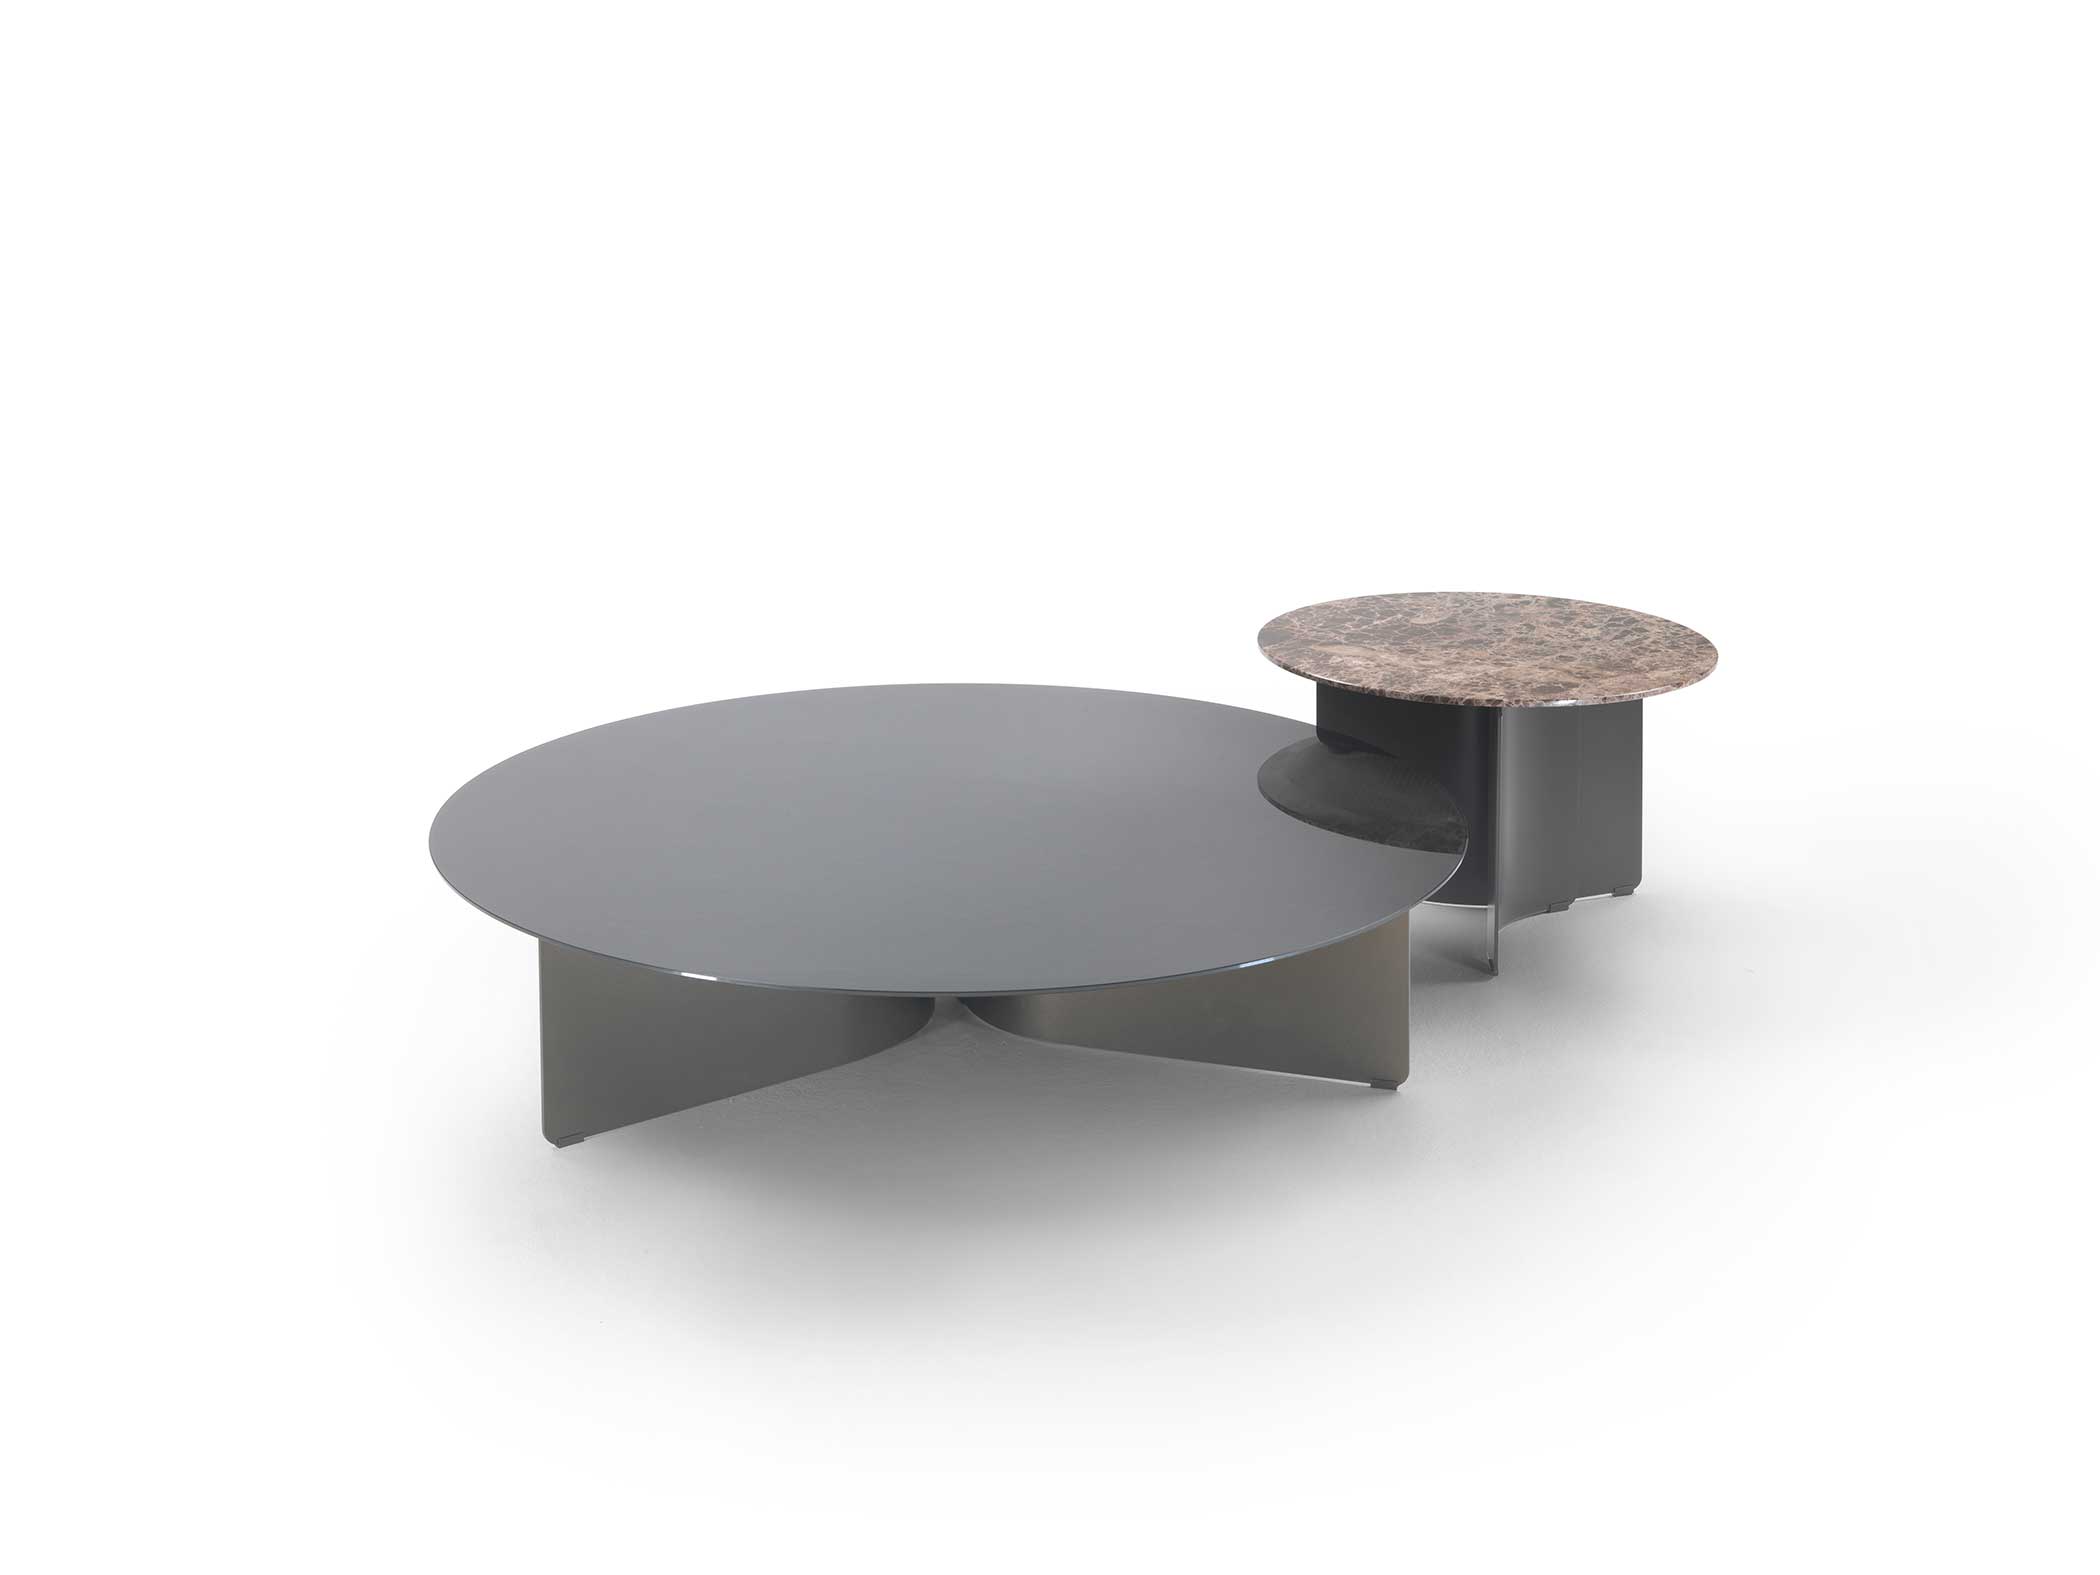 Img046 Wave Coffee Tables D120x27 OPM19 OPV4 D50x47h OPM9 OPP3